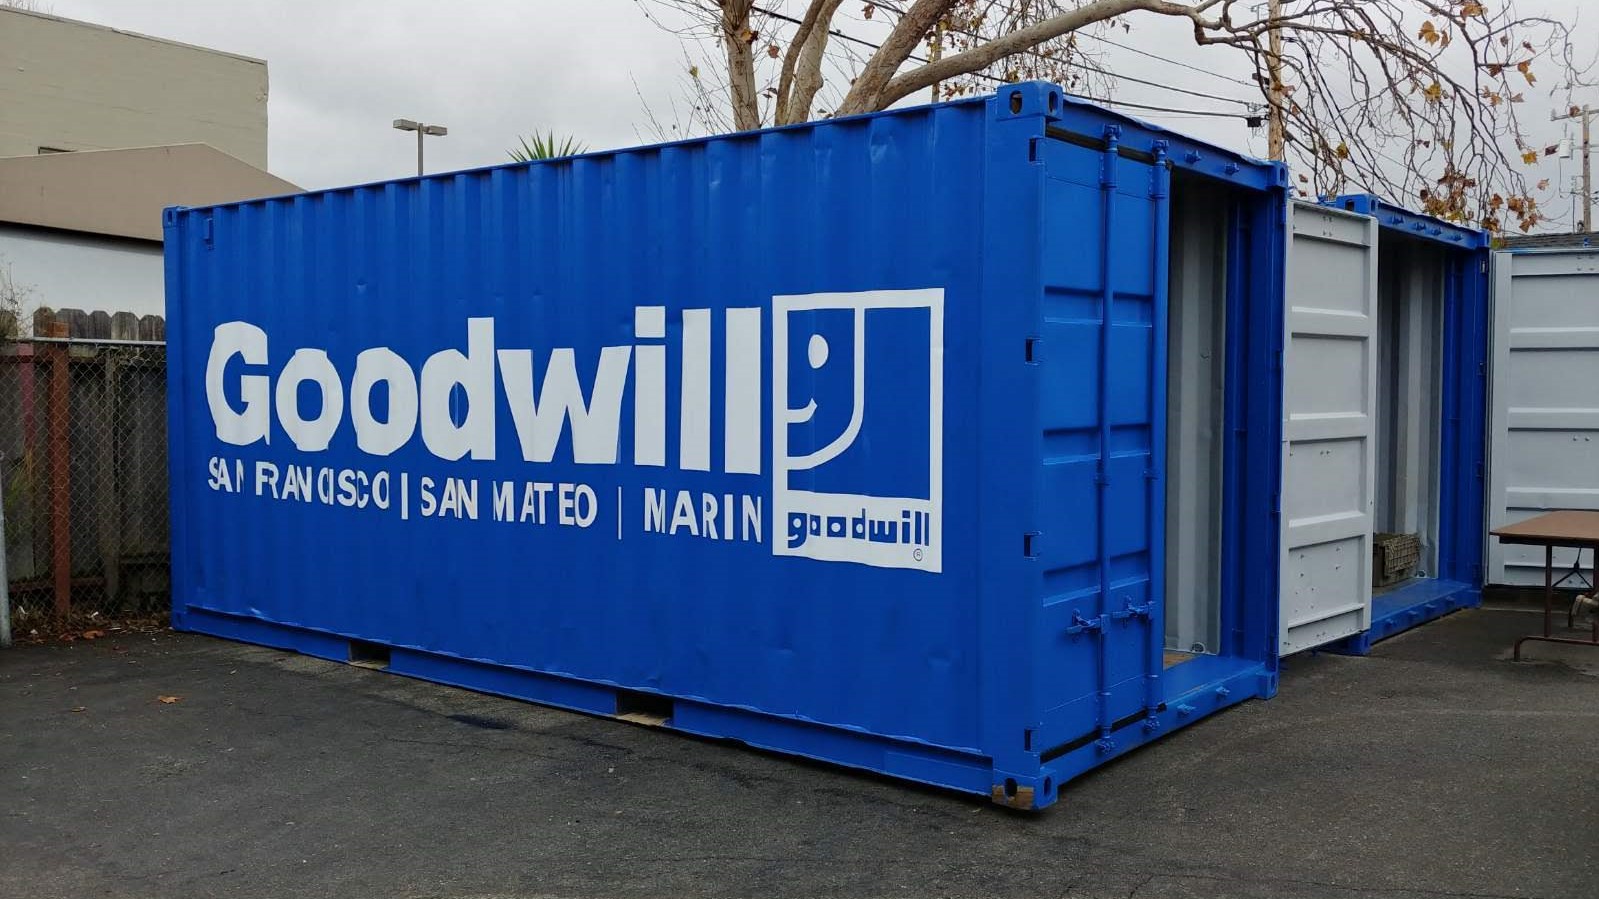 Goodwill blue 20ft shipping container San Francisco San Mateo Marin